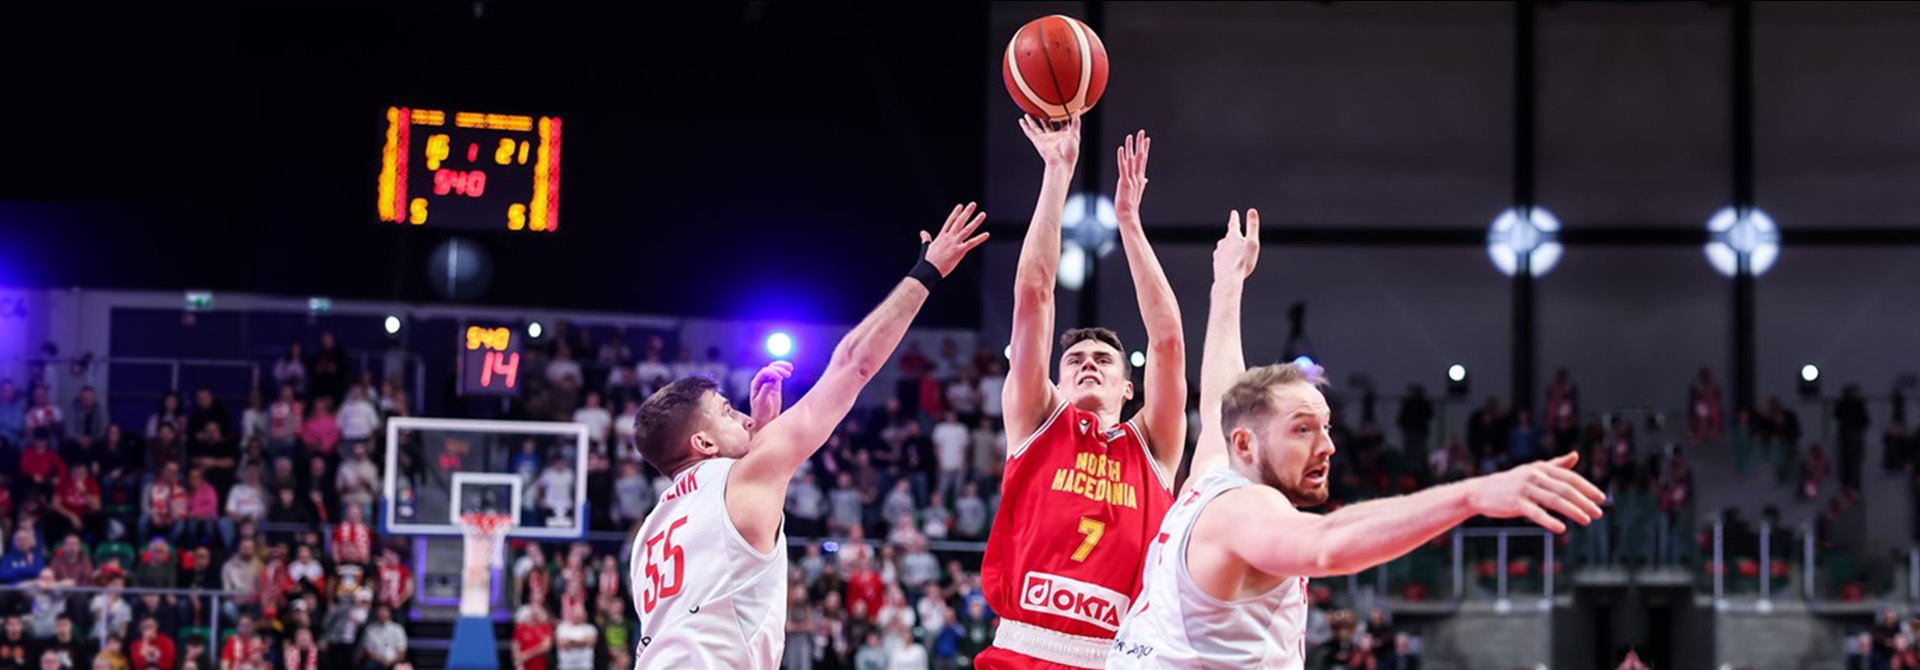 32+8+8 of Dimitrijevic helped North Macedonia defeat Poland